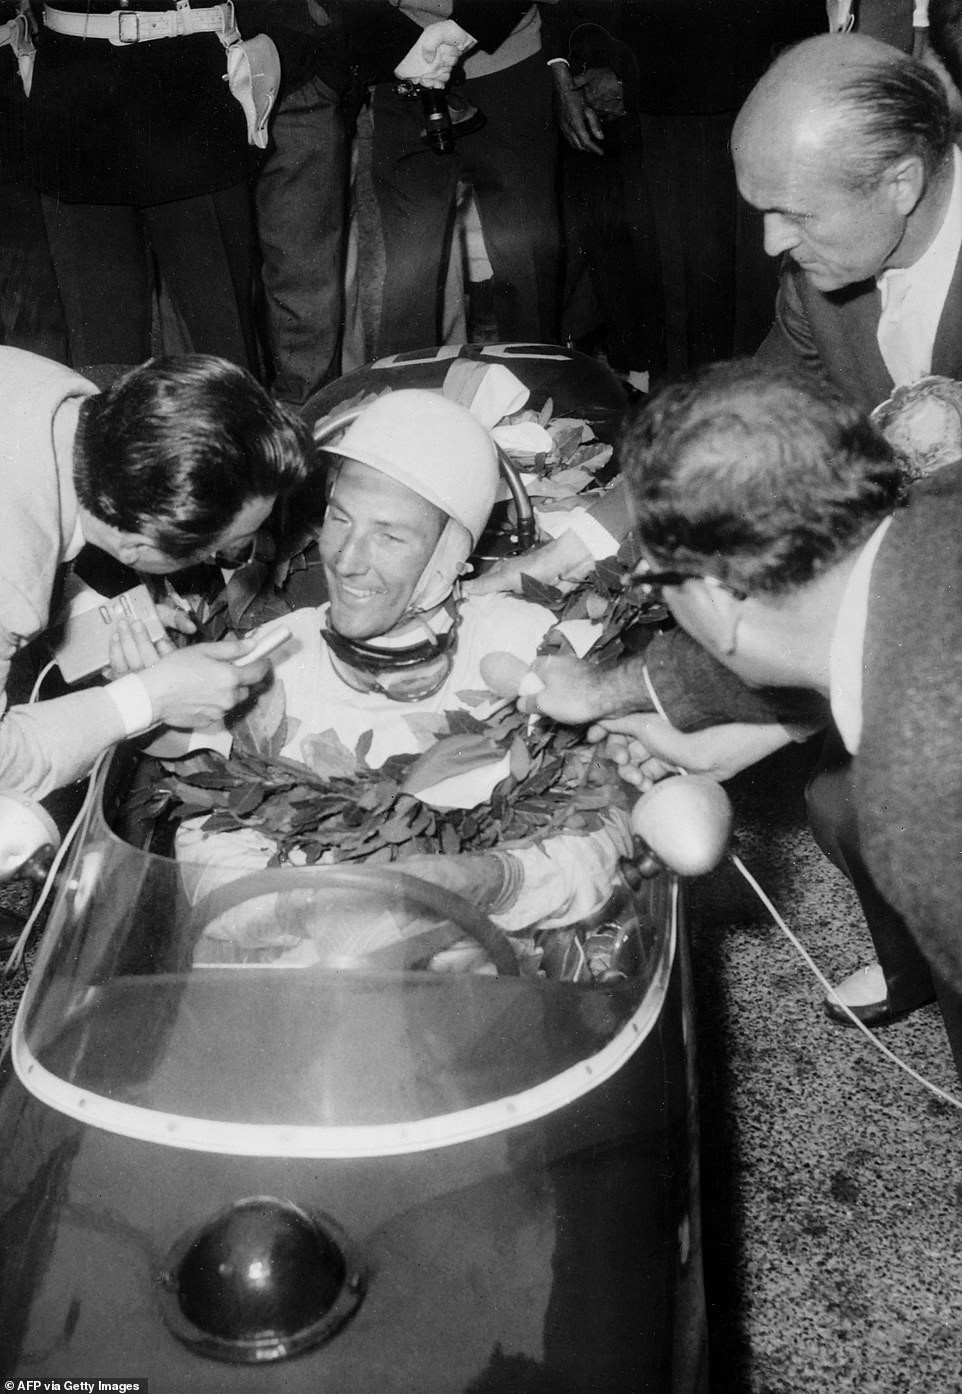 Moss is bombarded by journalists after winning the Monaco Grand Prix - triumphing in his Lotus against the faster Ferraris.